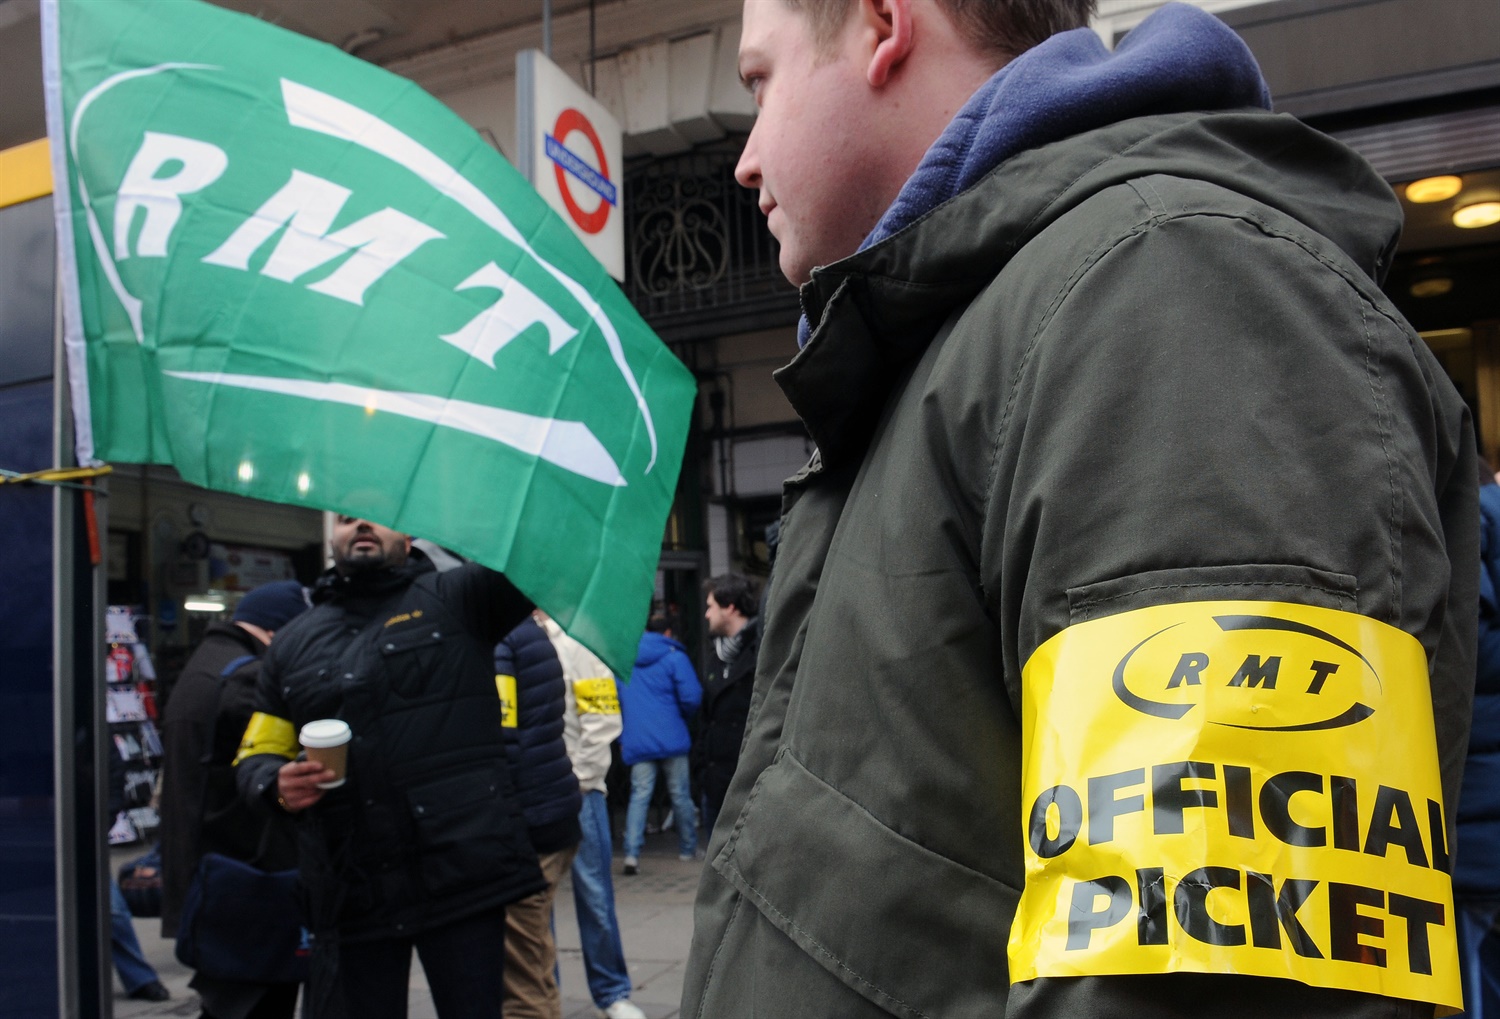 Southern to face legal action by RMT over decision to withhold holiday pay